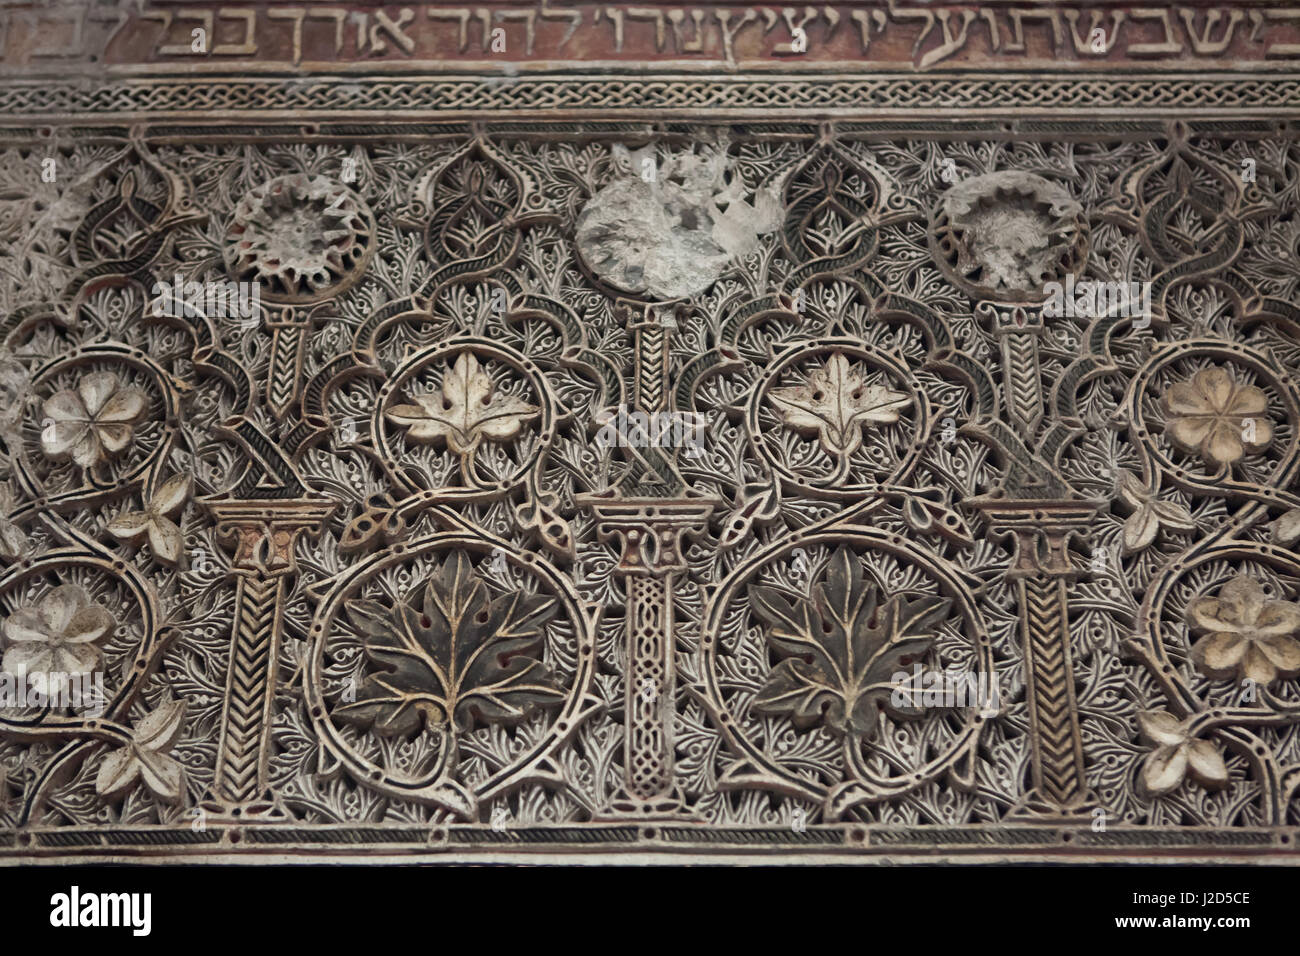 Mudejar wall carving in the women's gallery of the Sinagoga del Transito, now the Sephardi Museum, in Toledo, Spain. Stock Photo